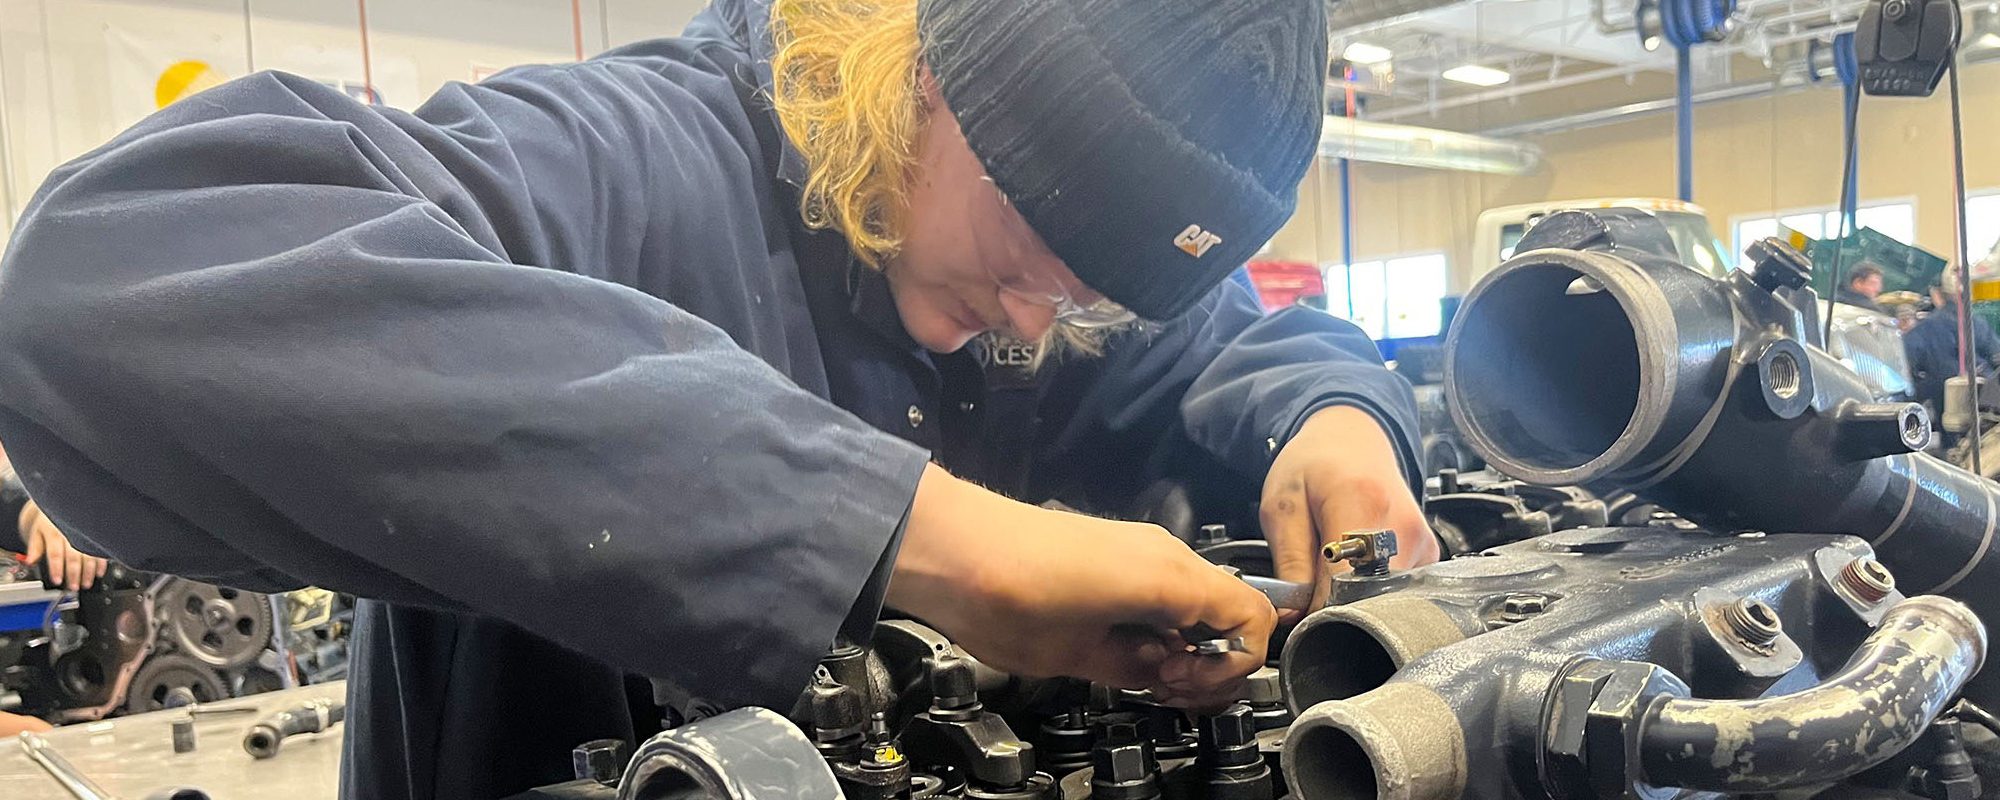 A student in blue coveralls and a cap leans over an engine block.